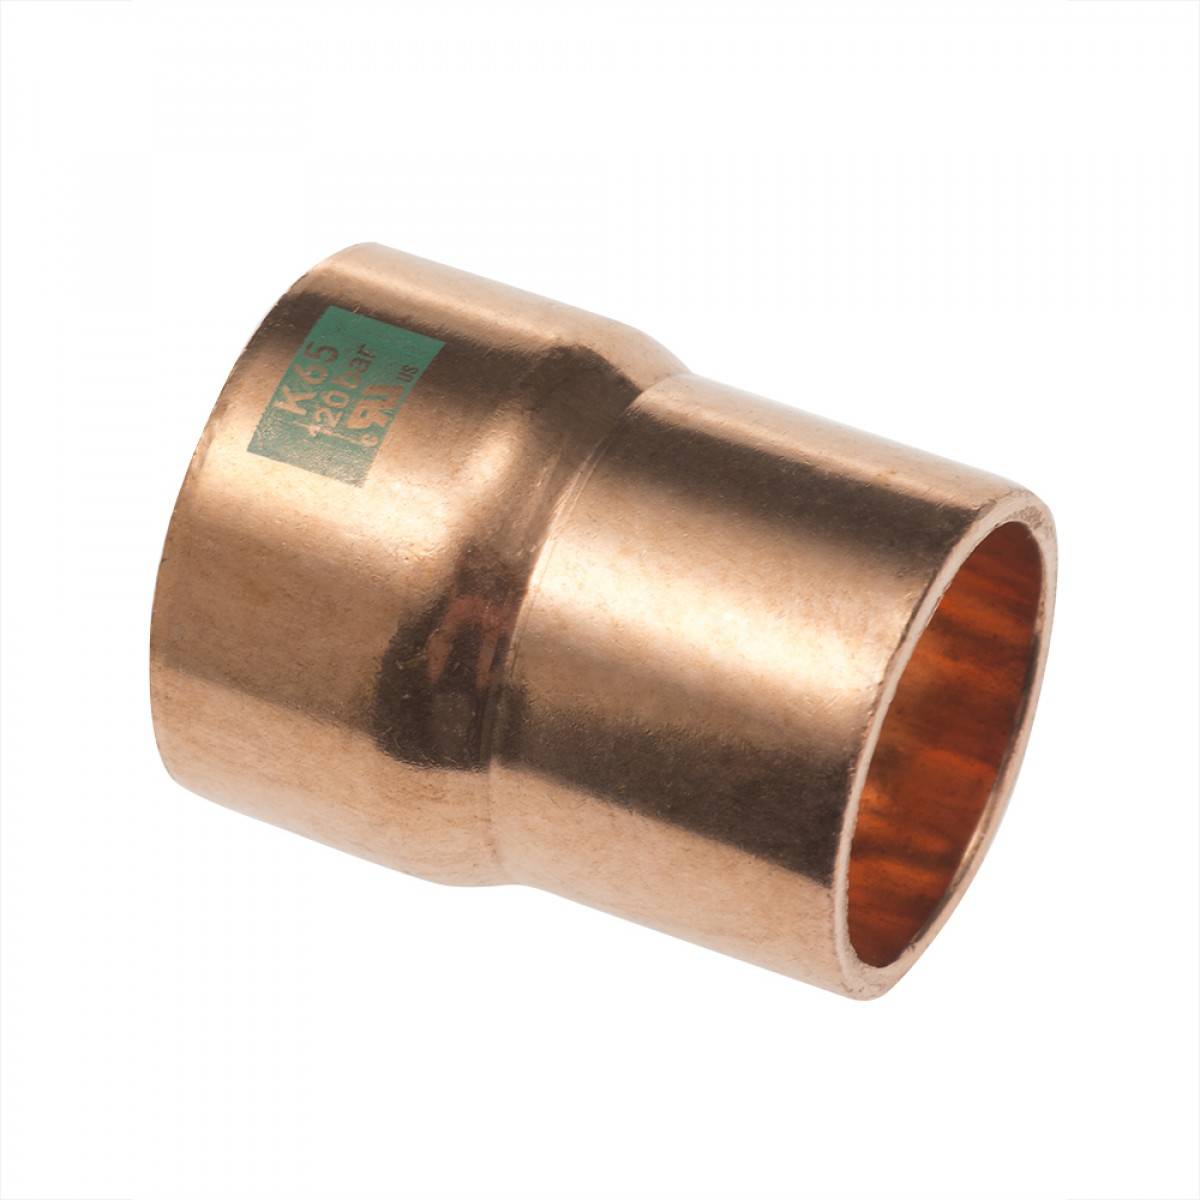 K65 Fitting Reducer to Metric (Female Inch x Male Metric)